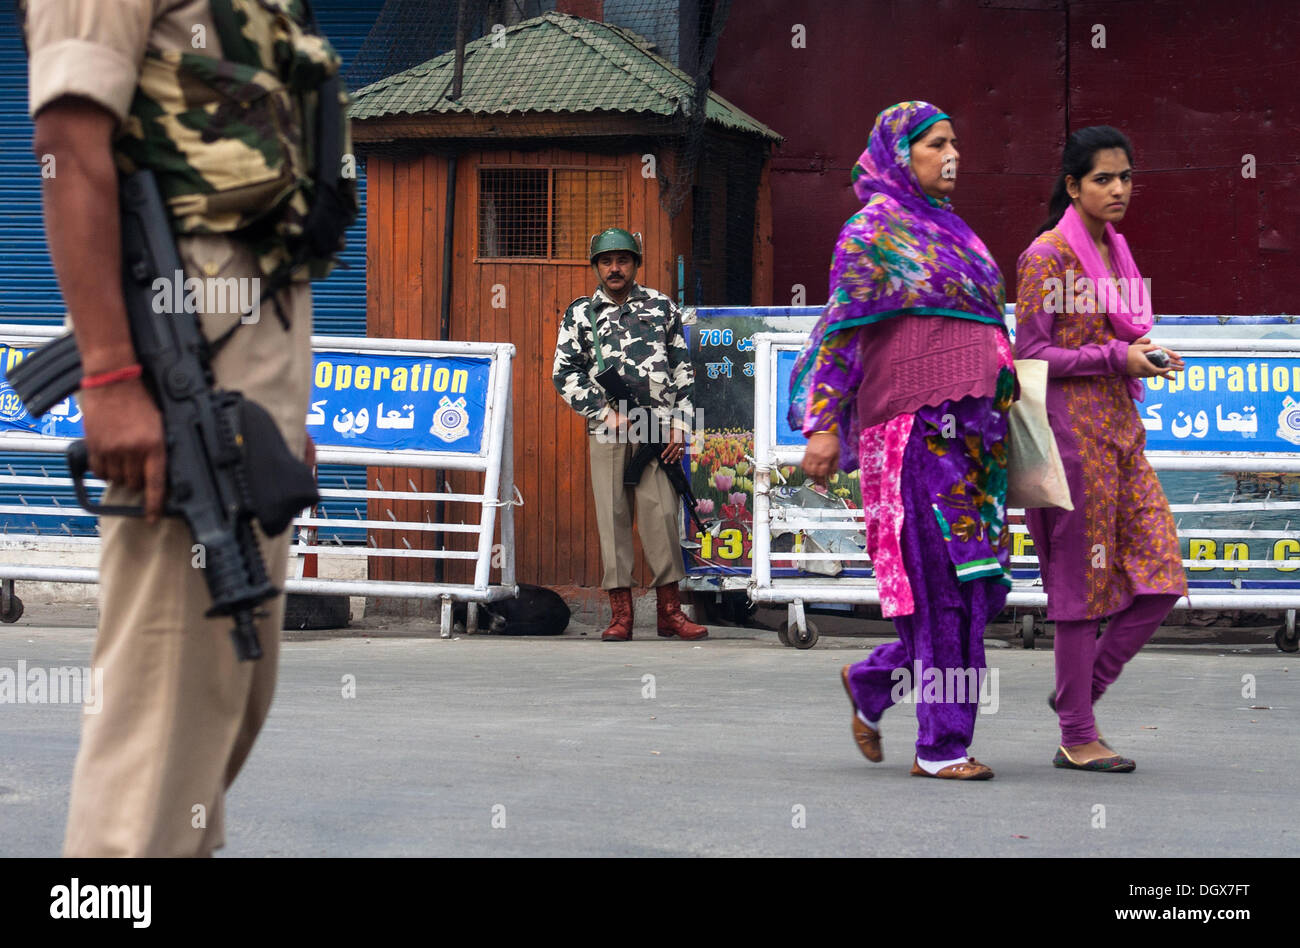 Srinagar, Indian Administered Kashmir 27 october 2013. Indian paramilitary soldiers  guard  the deserted  as kashmnir women pass by during a strike in Srinagar the summer capital of indian adminstered kashmir ,india . Large number of Indian troops were deployed to thwart anti-Indian protests in Kashmir. Indian troops landed in Kashmir  on  27 October  in kashmir  in 1947 A shutdown called by many resistance groups against the landing of the Indian army in Jammu and Kashmir this day in 1947 is being observed on Sunday.. (Sofi Suhail/ Alamy Live News) Stock Photo